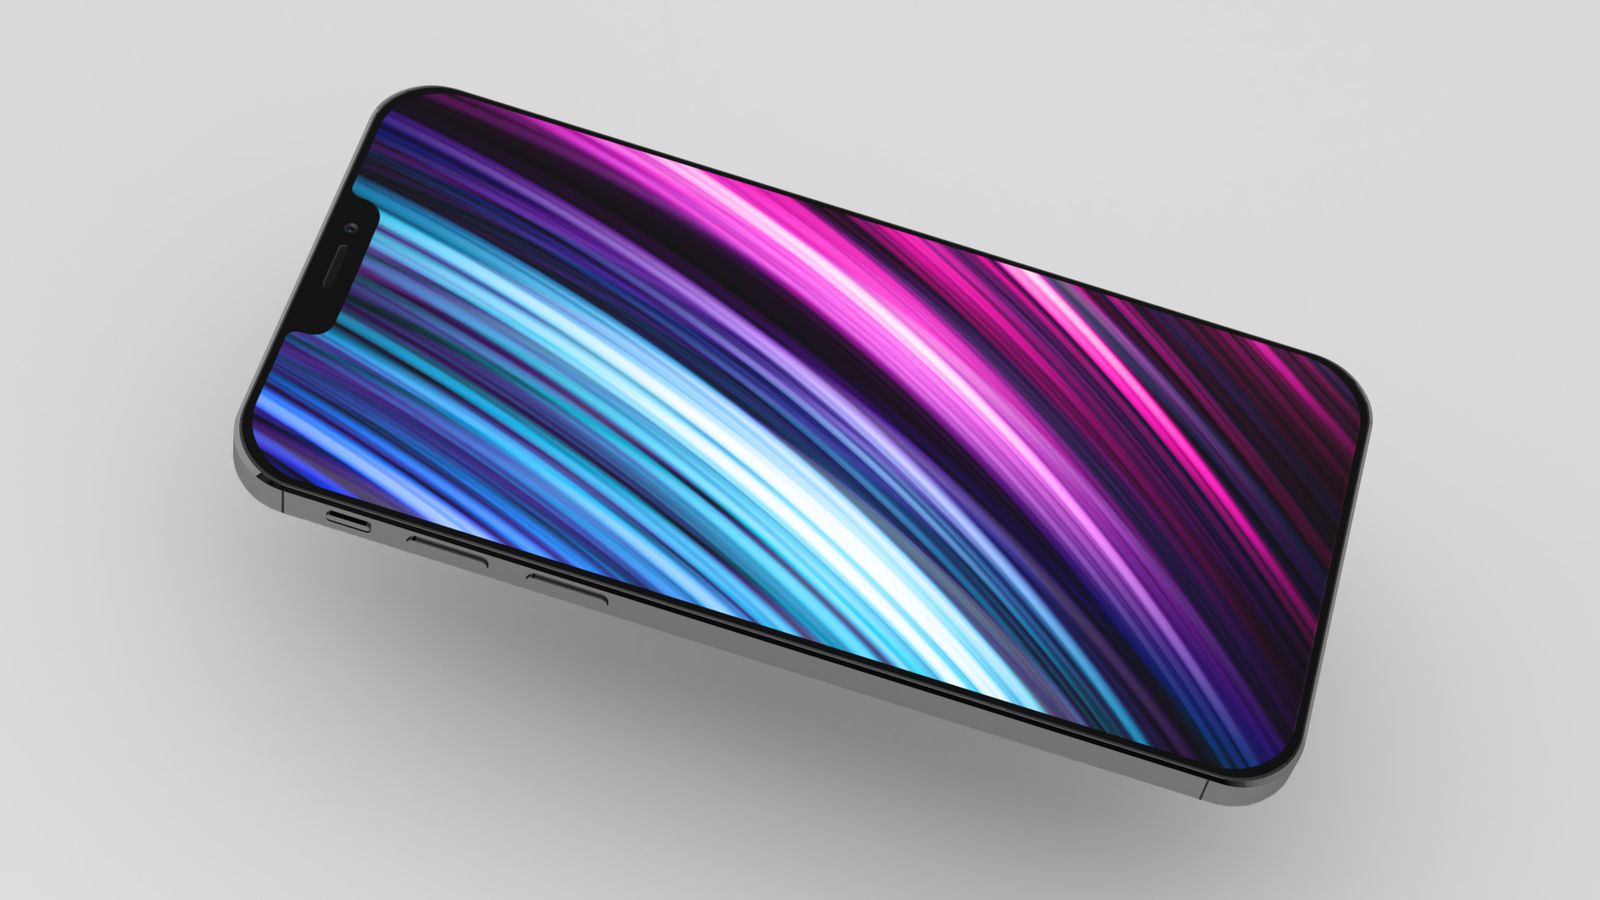 Bloomberg 5g Iphones To Feature Flat Edges And Slimmer Notch